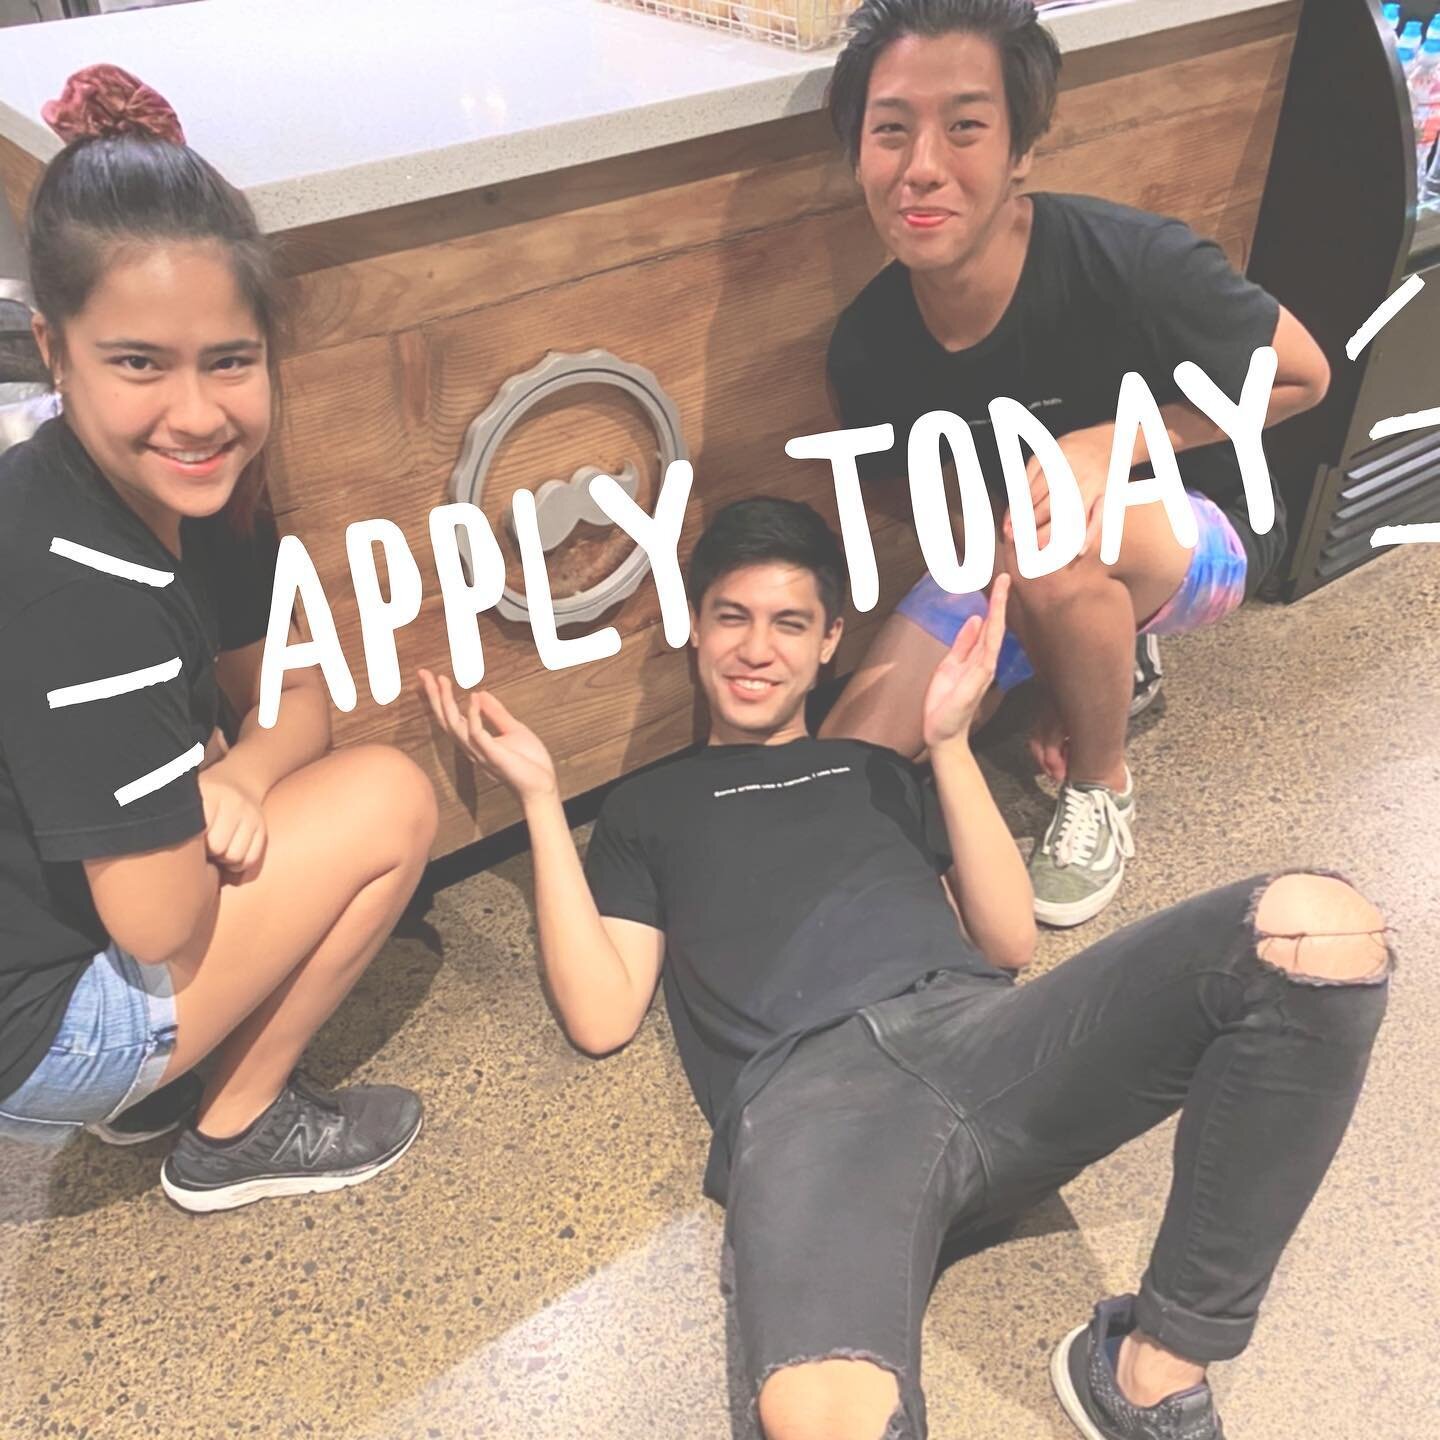 We are looking for fun spirited individuals to join our boba barista team for long term growth! 
We value:
- Positive attitudes + experiences 
- Teamwork + communication 
- Flexibility + adaptability 
- Responsibility + commitment 
All resumes with a